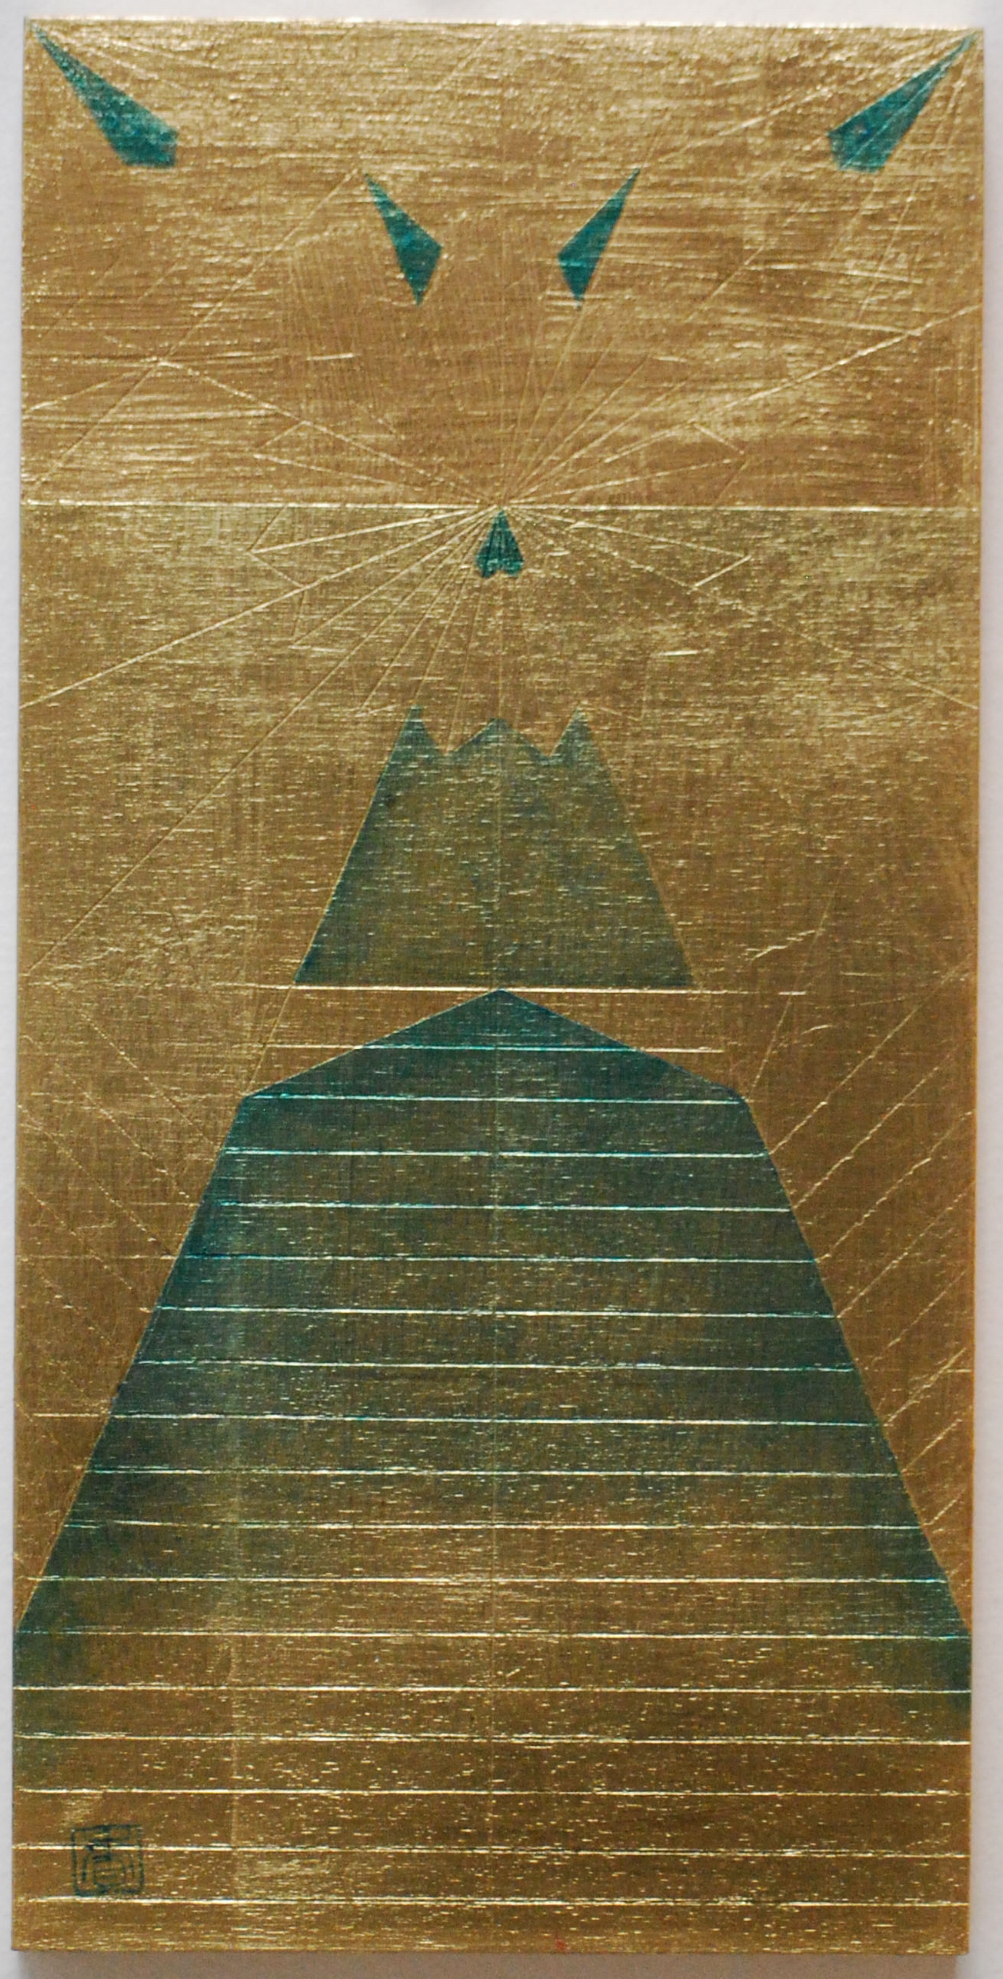 Peace Study IV, 2016, Oil and patina on gold-leafed panel, 12” x 6”